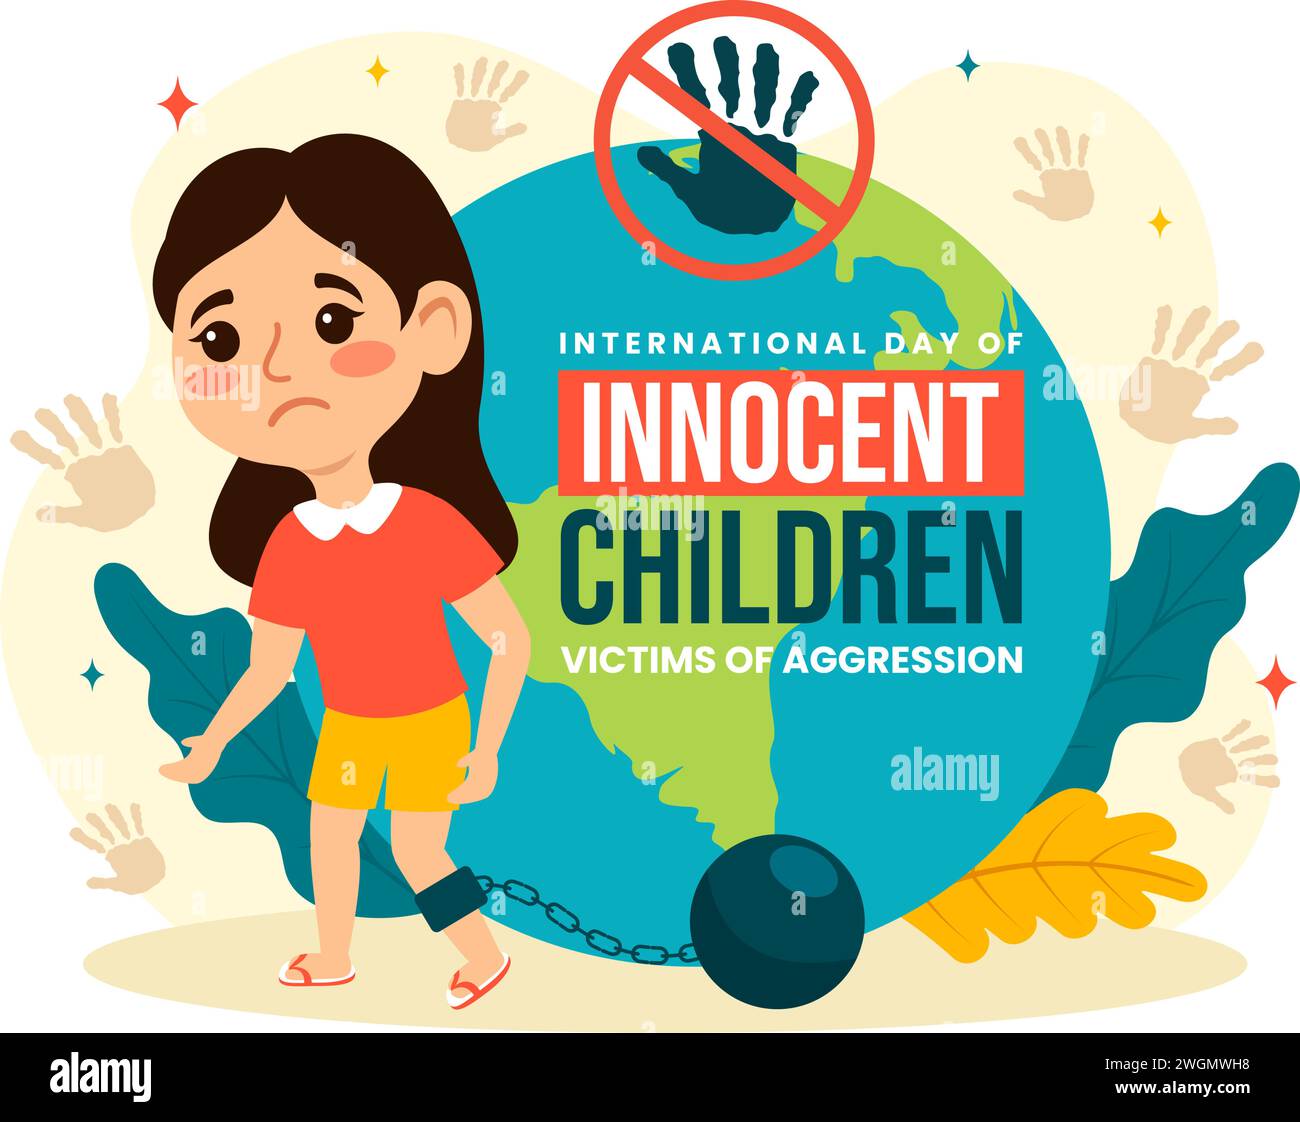 International Day of Innocent Children Victims of Aggression Vector Illustration on 4 June with Kids Sad Pensive and Cries in Flat Cartoon Background Stock Vector